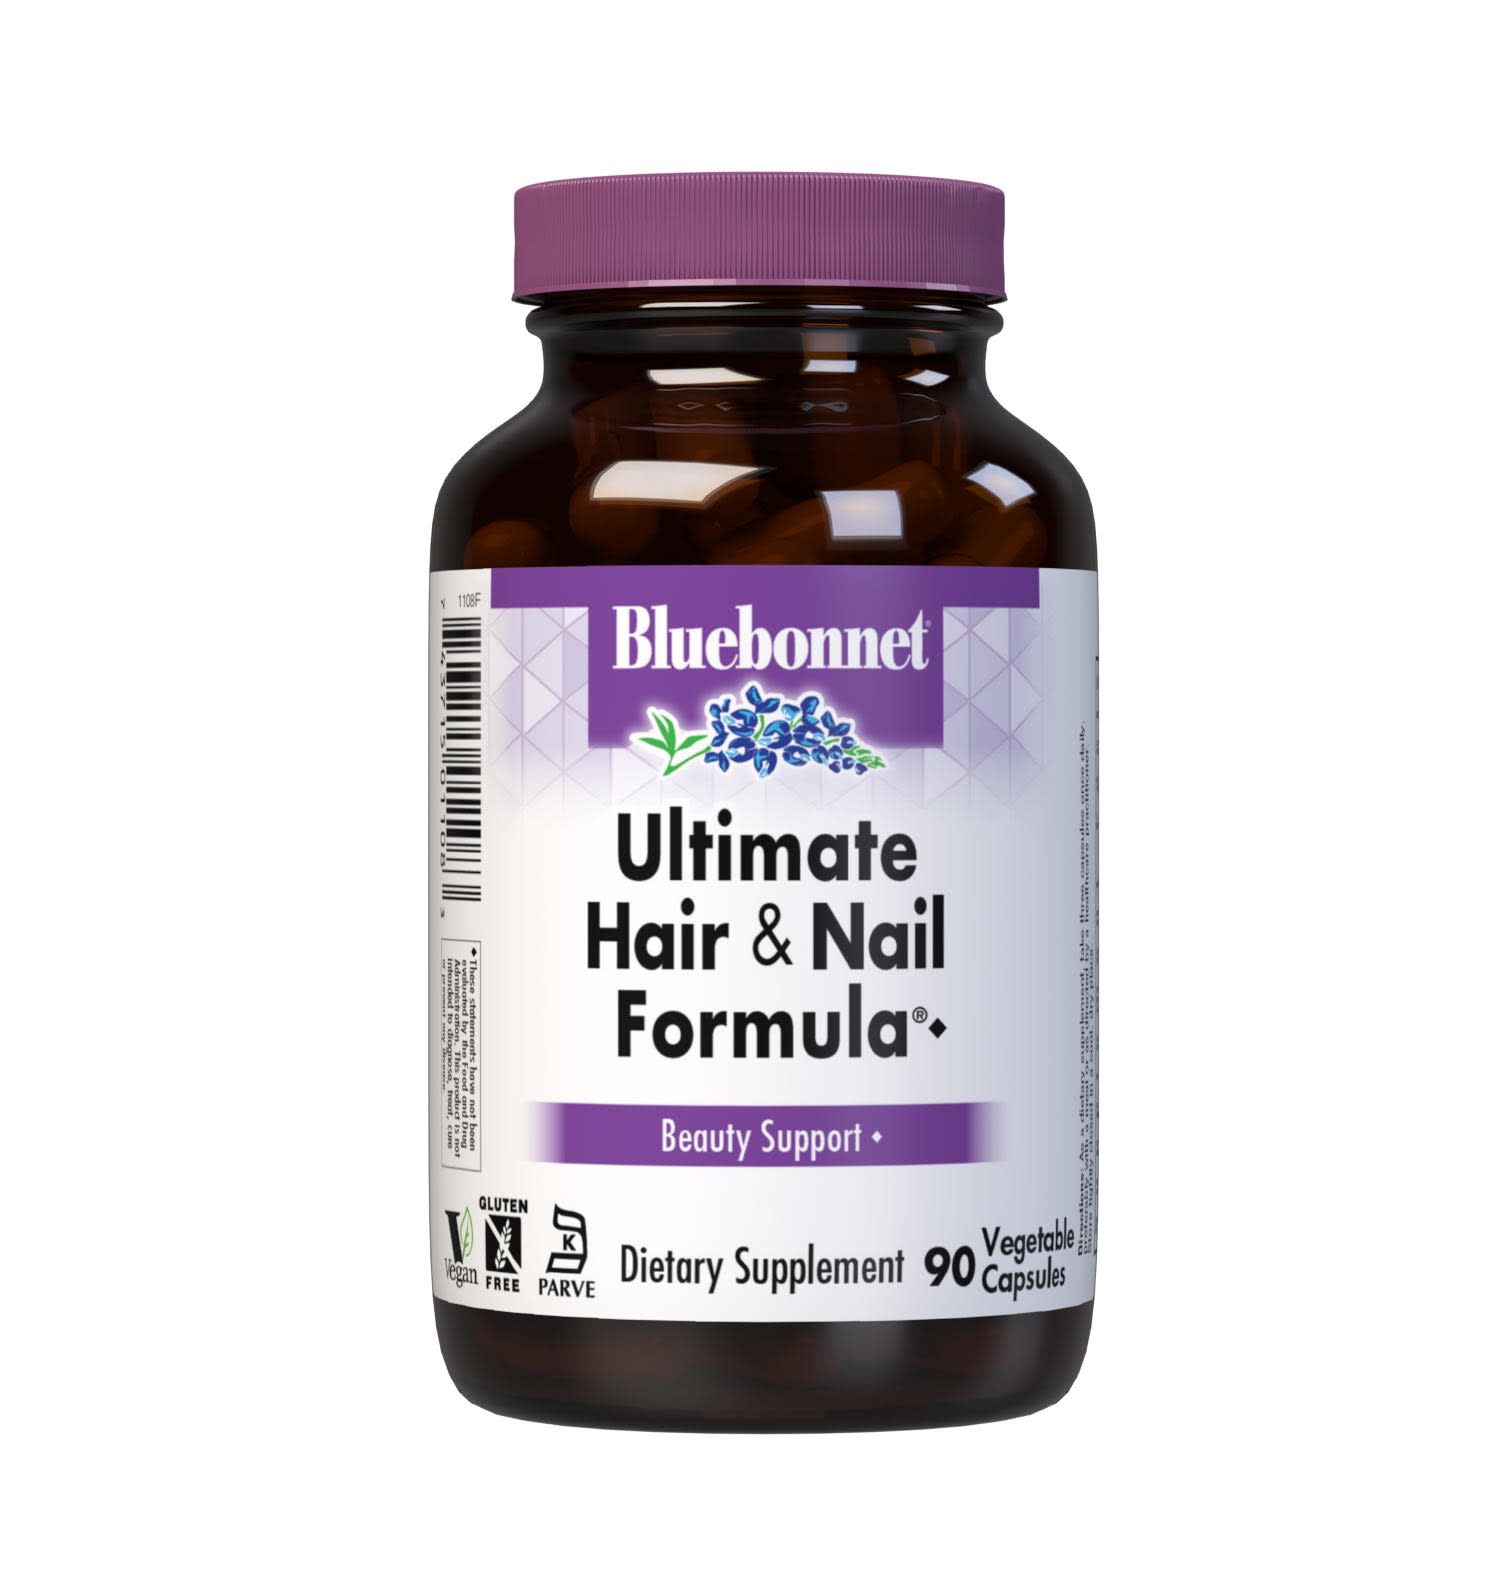 Bluebonnet’s Ultimate Hair & Nail Formula 90 Vegetable Capsules are specially formulated with high potency vitamins, minerals, amino acids, horsetail silica, and OptiMSM a superior form of active sulphur, for optimal hair and nail support. #size_90 count